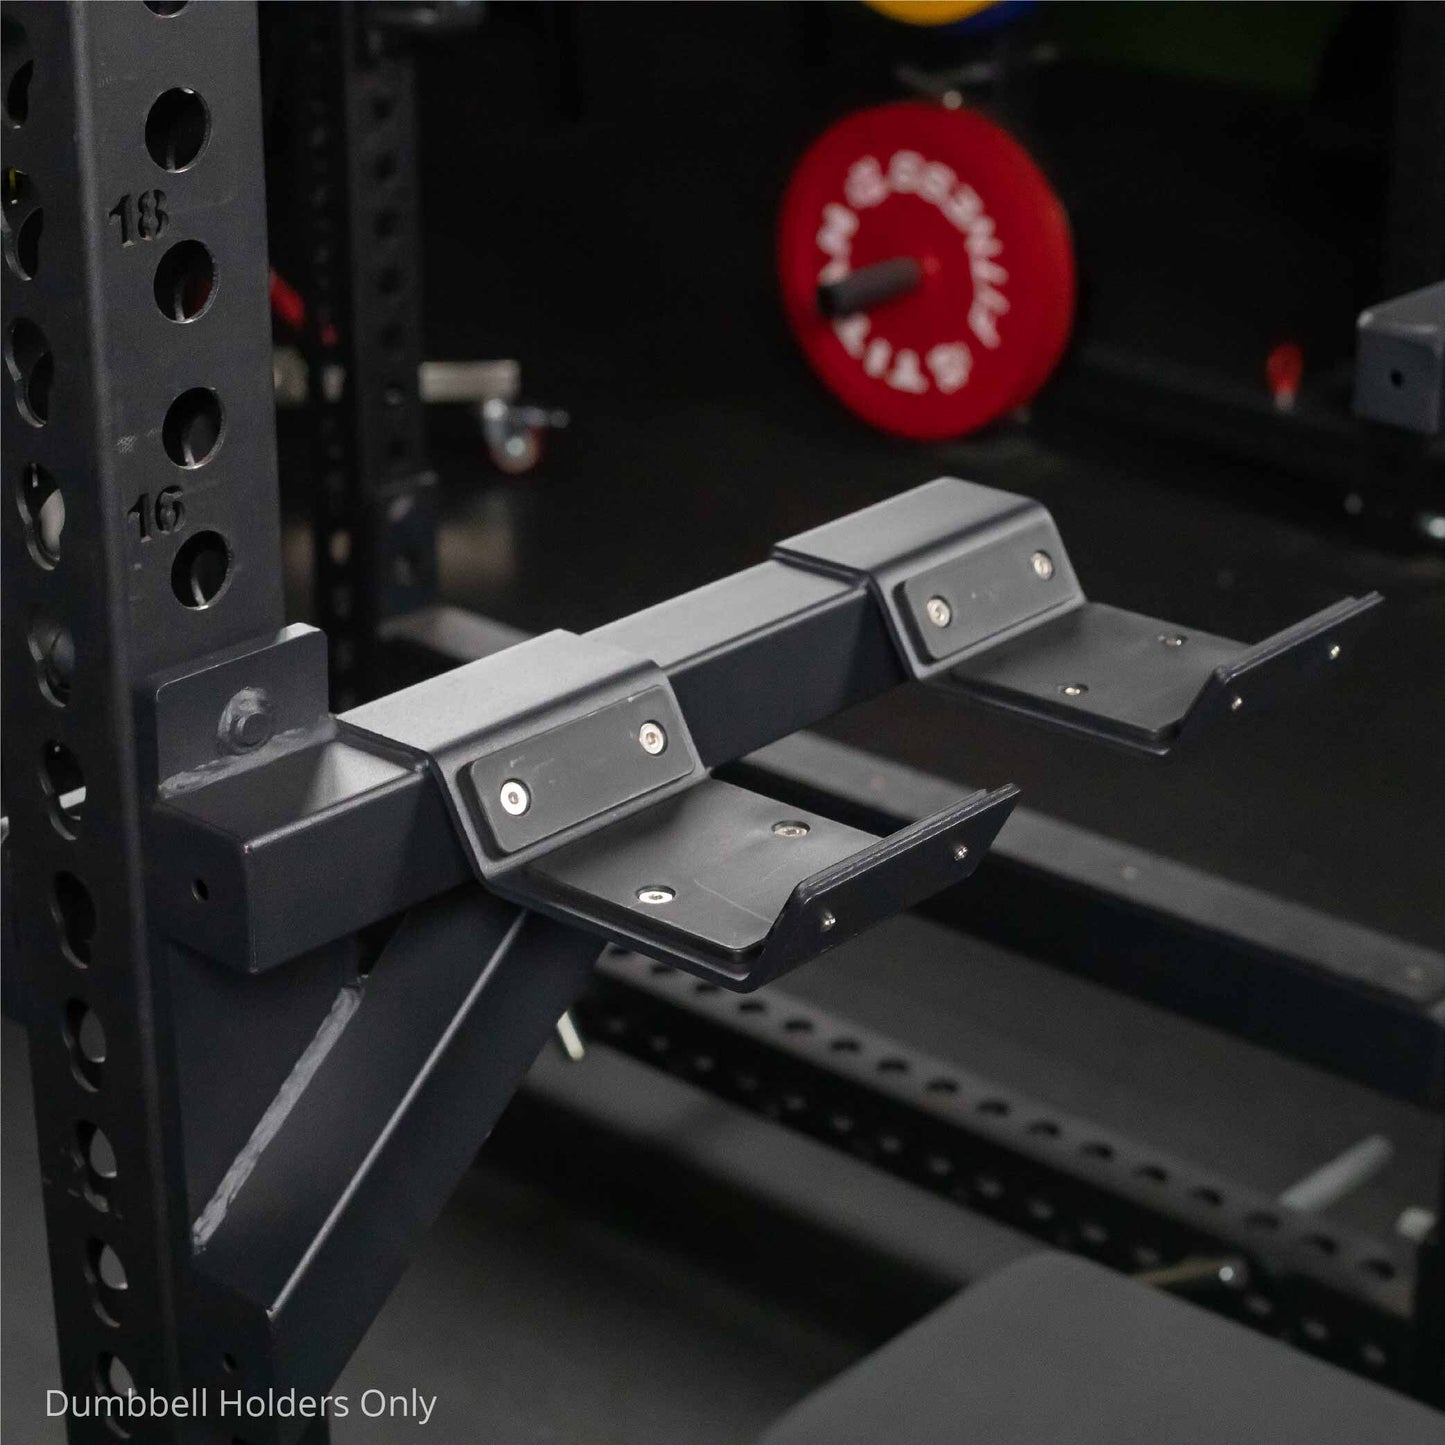 X-3 or TITAN Series Dumbbell Holders - view 4